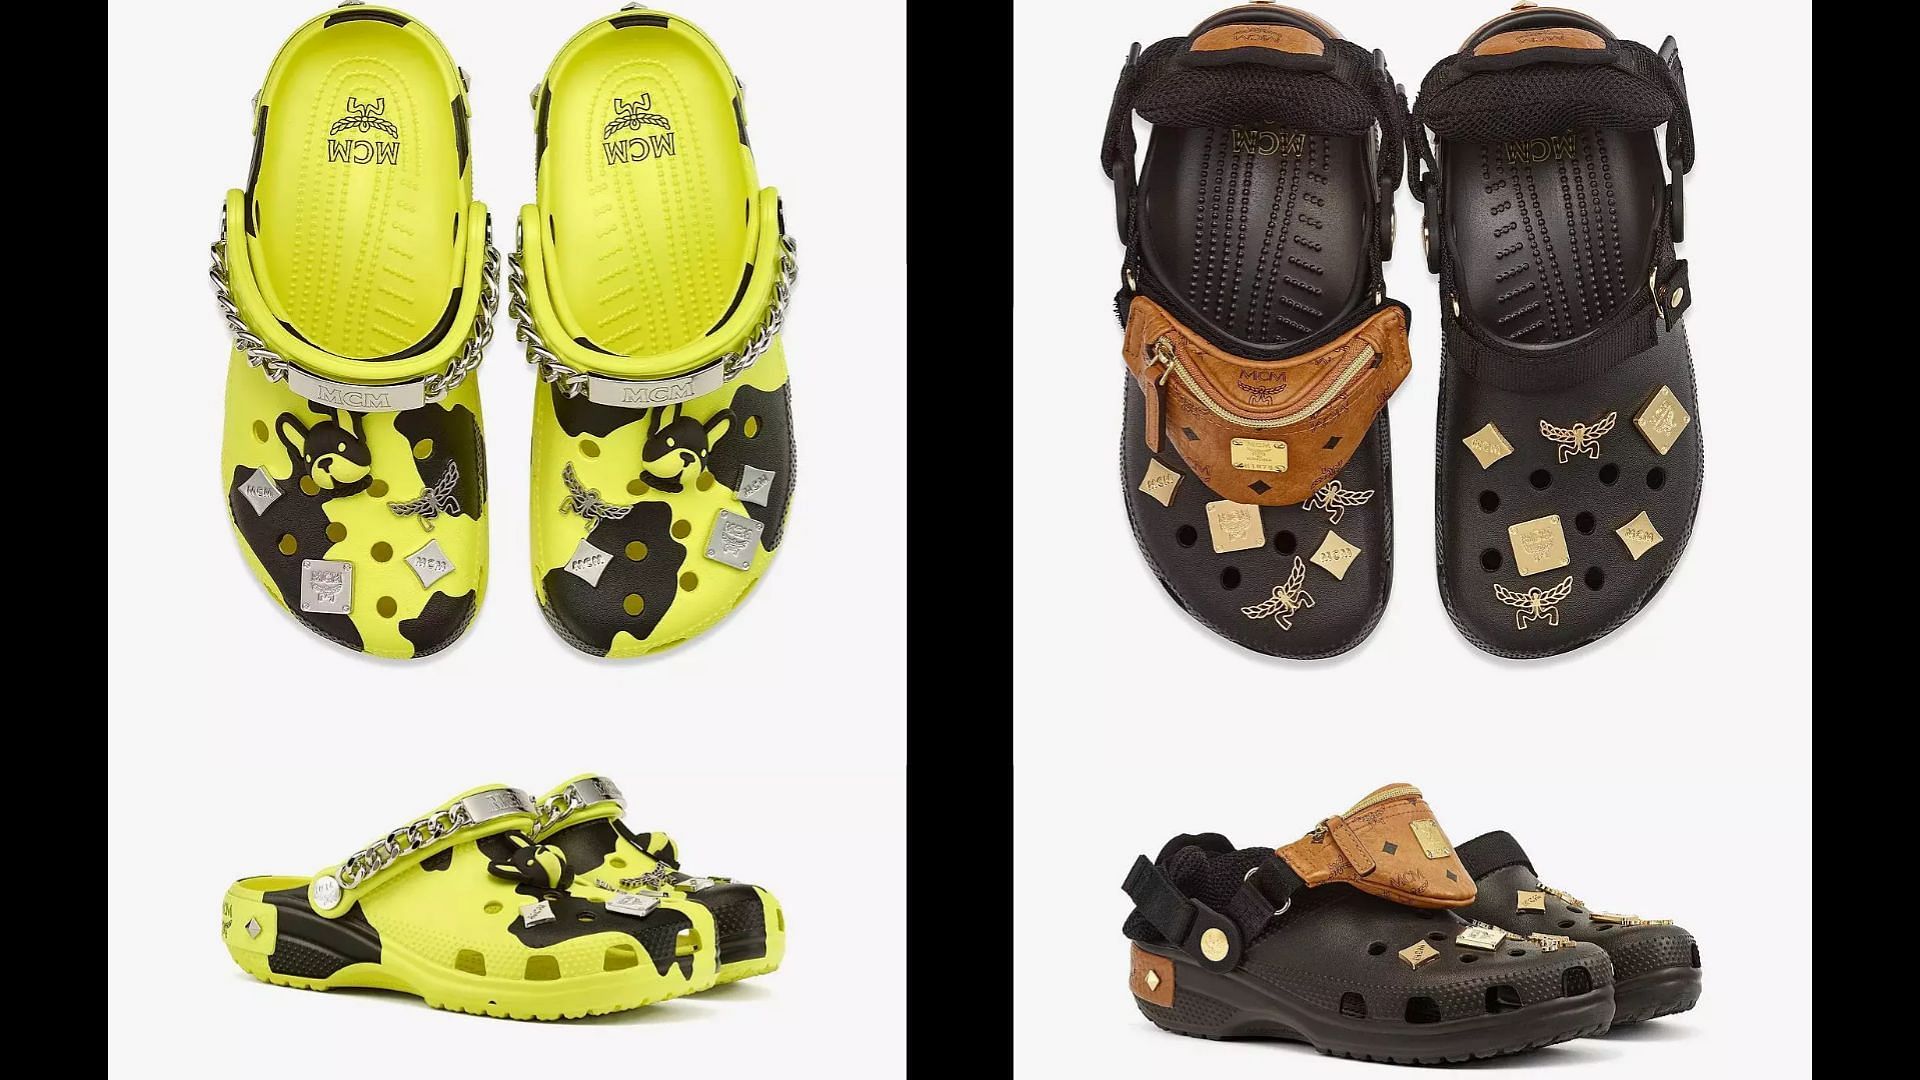 Newly released MCM X Crocs limited-edition 2-piece collection (Image via MCM)